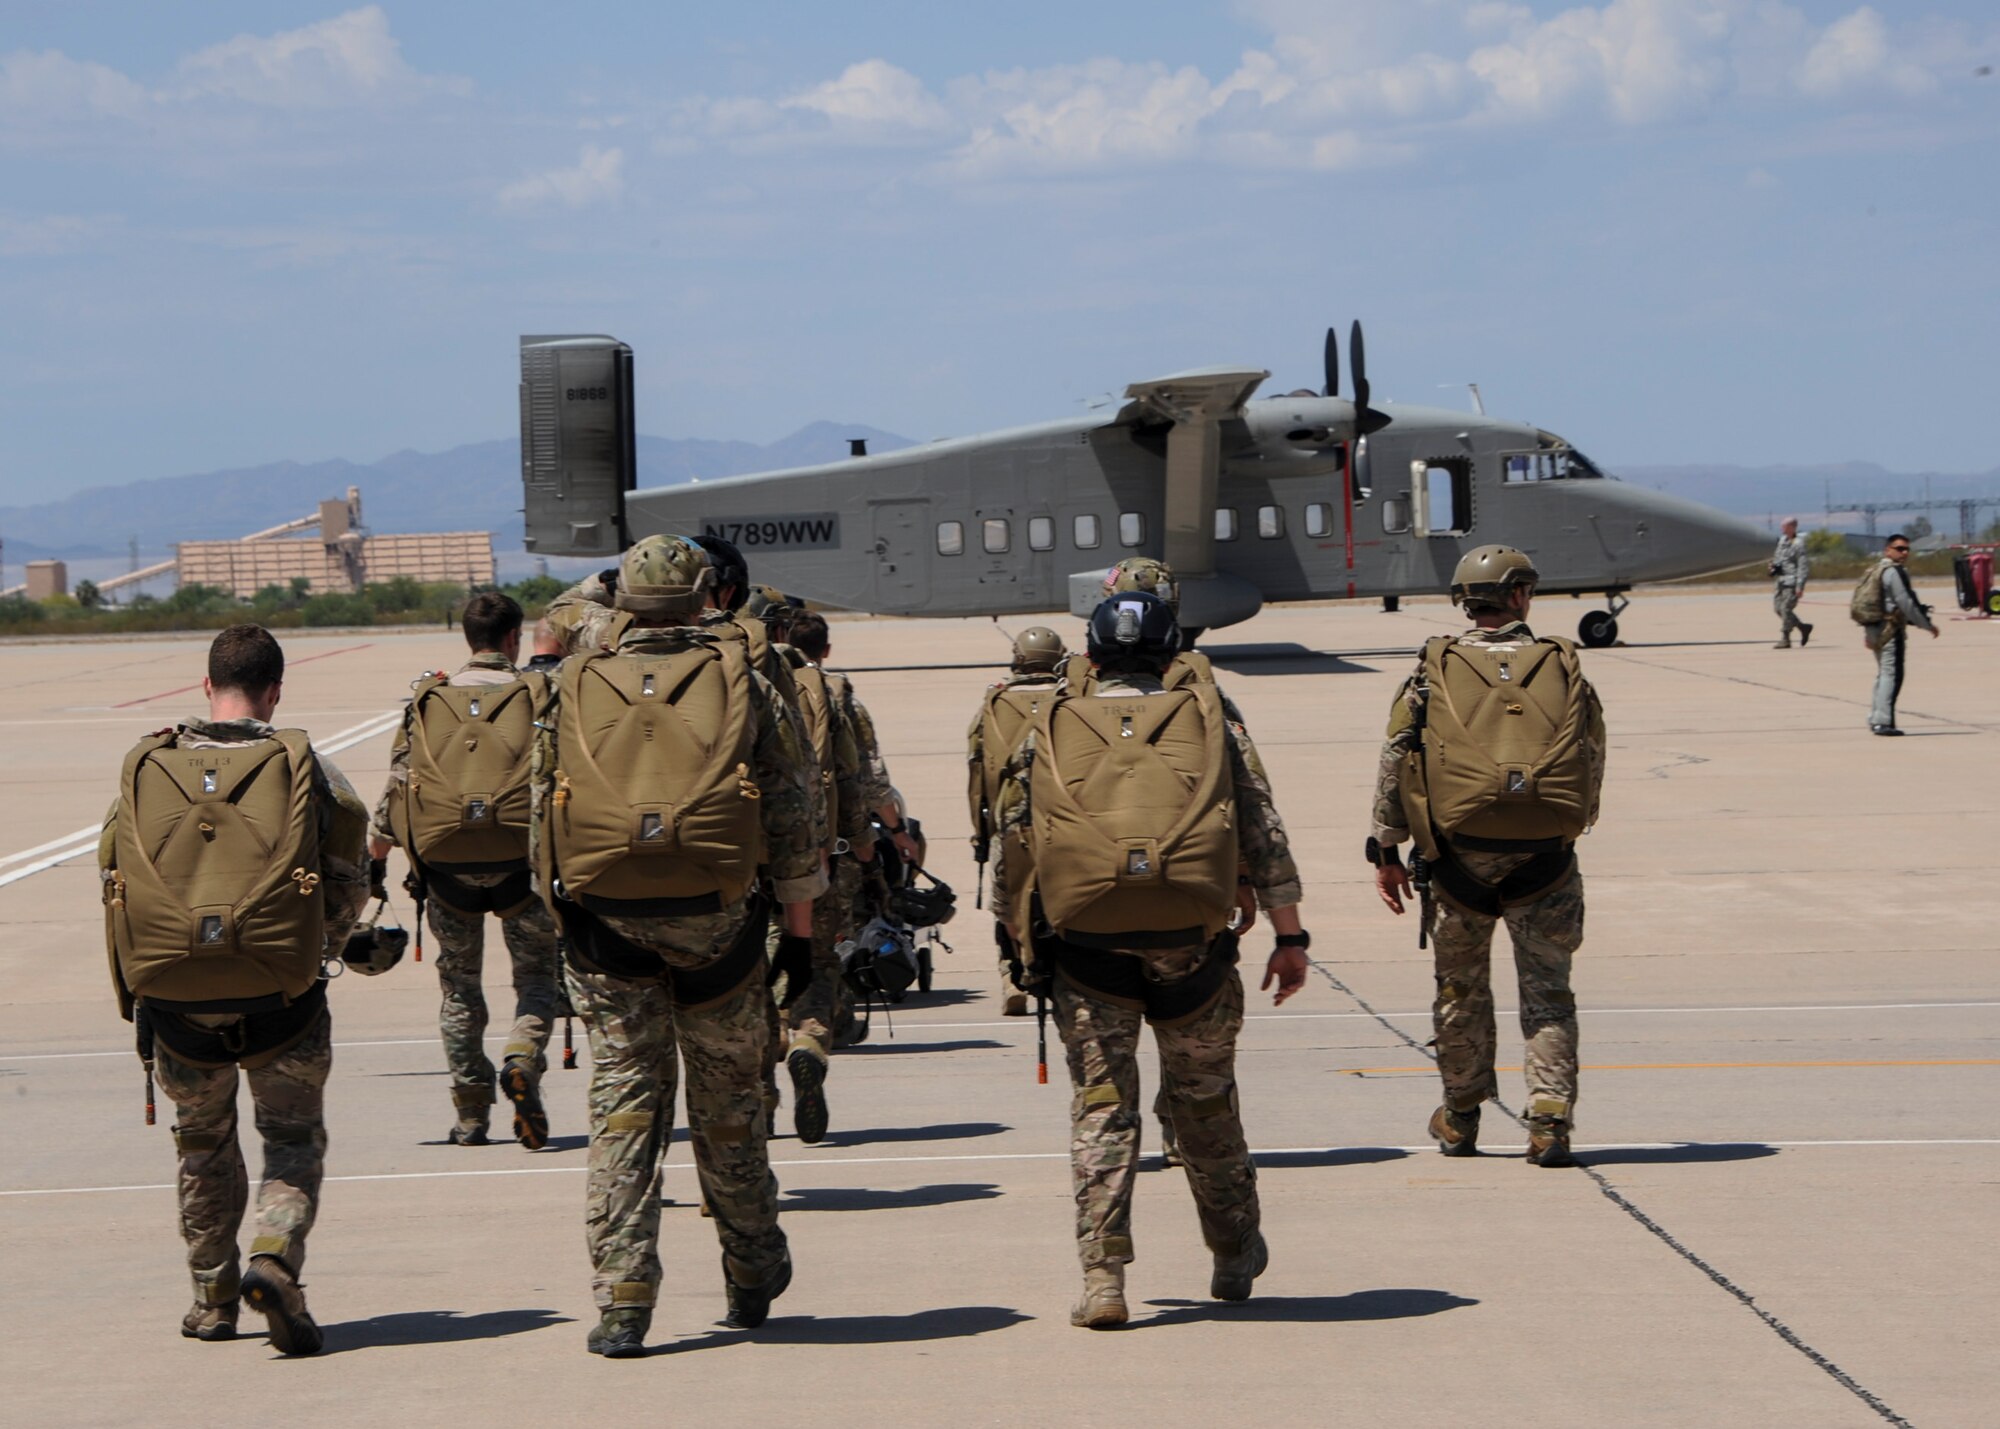 U.S. Airmen prepare to board a C-23 Sherpa during the Military Freefall Jumpmaster Course at Davis-Monthan Air Force Base, Ariz., June 28, 2016. During each free fall, the success of the mission and the lives of others are in the hands of the jumpmasters. (U.S. Air Force photo by Airman Nathan H. Barbour/Released)